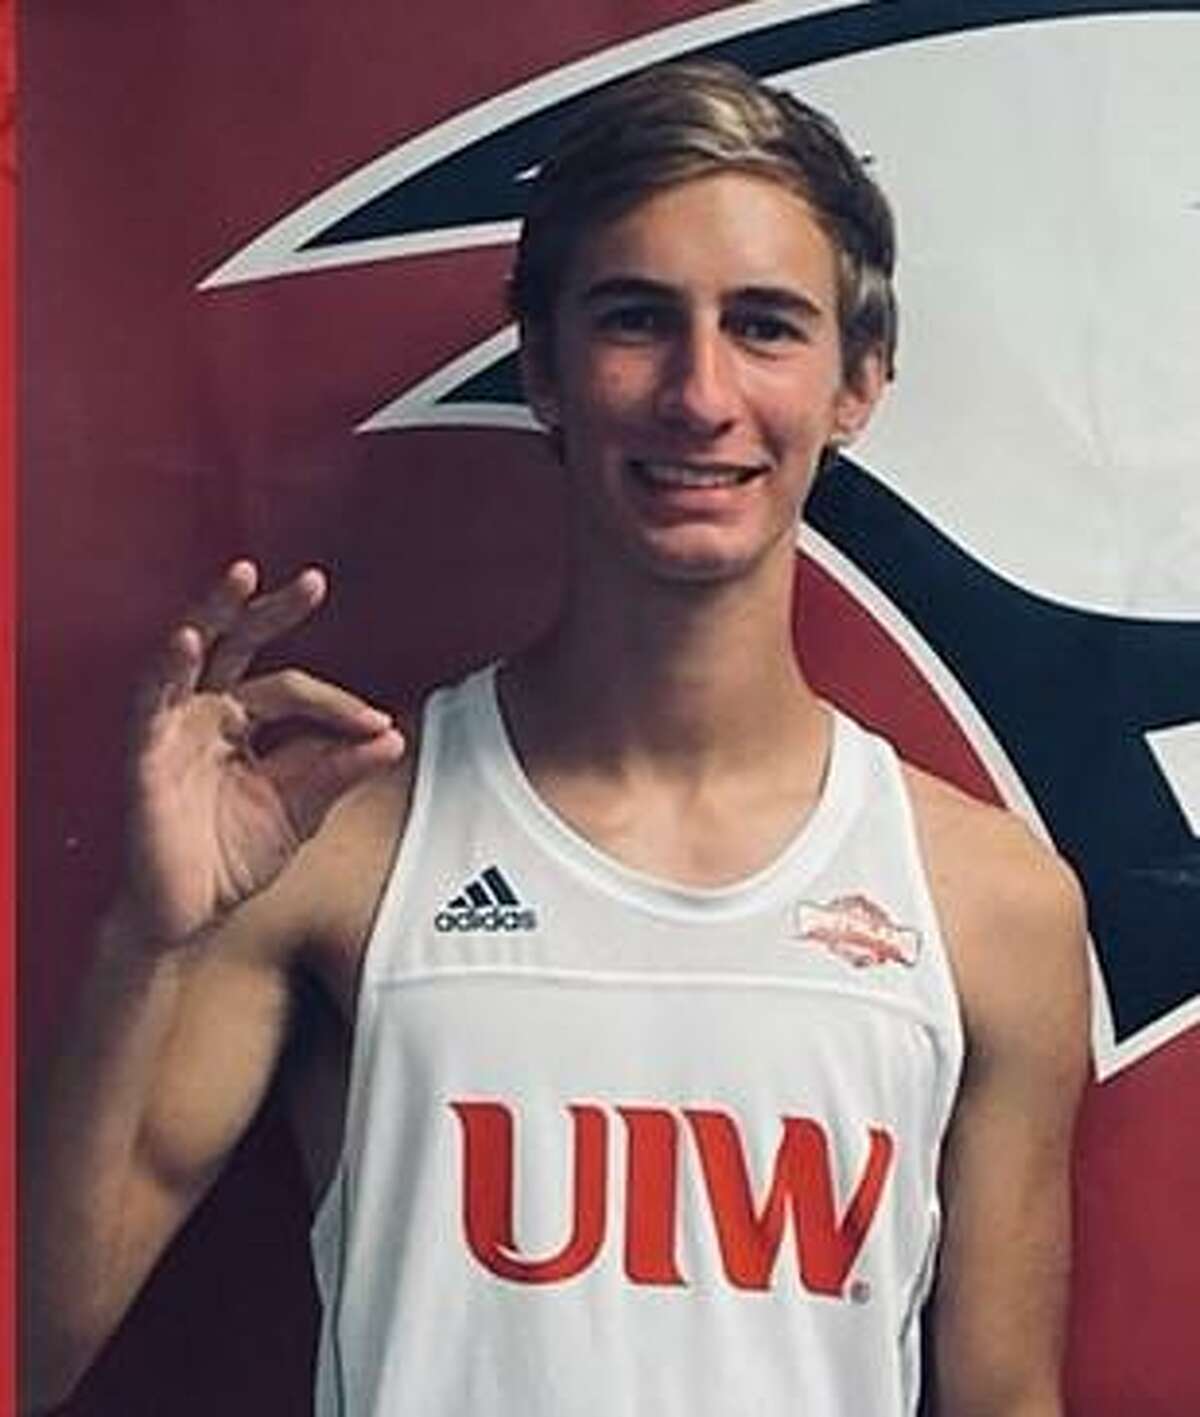 Jonah Ulbricht, who is signed with UIW, is a senior pole vaulter for Smithson Valley.